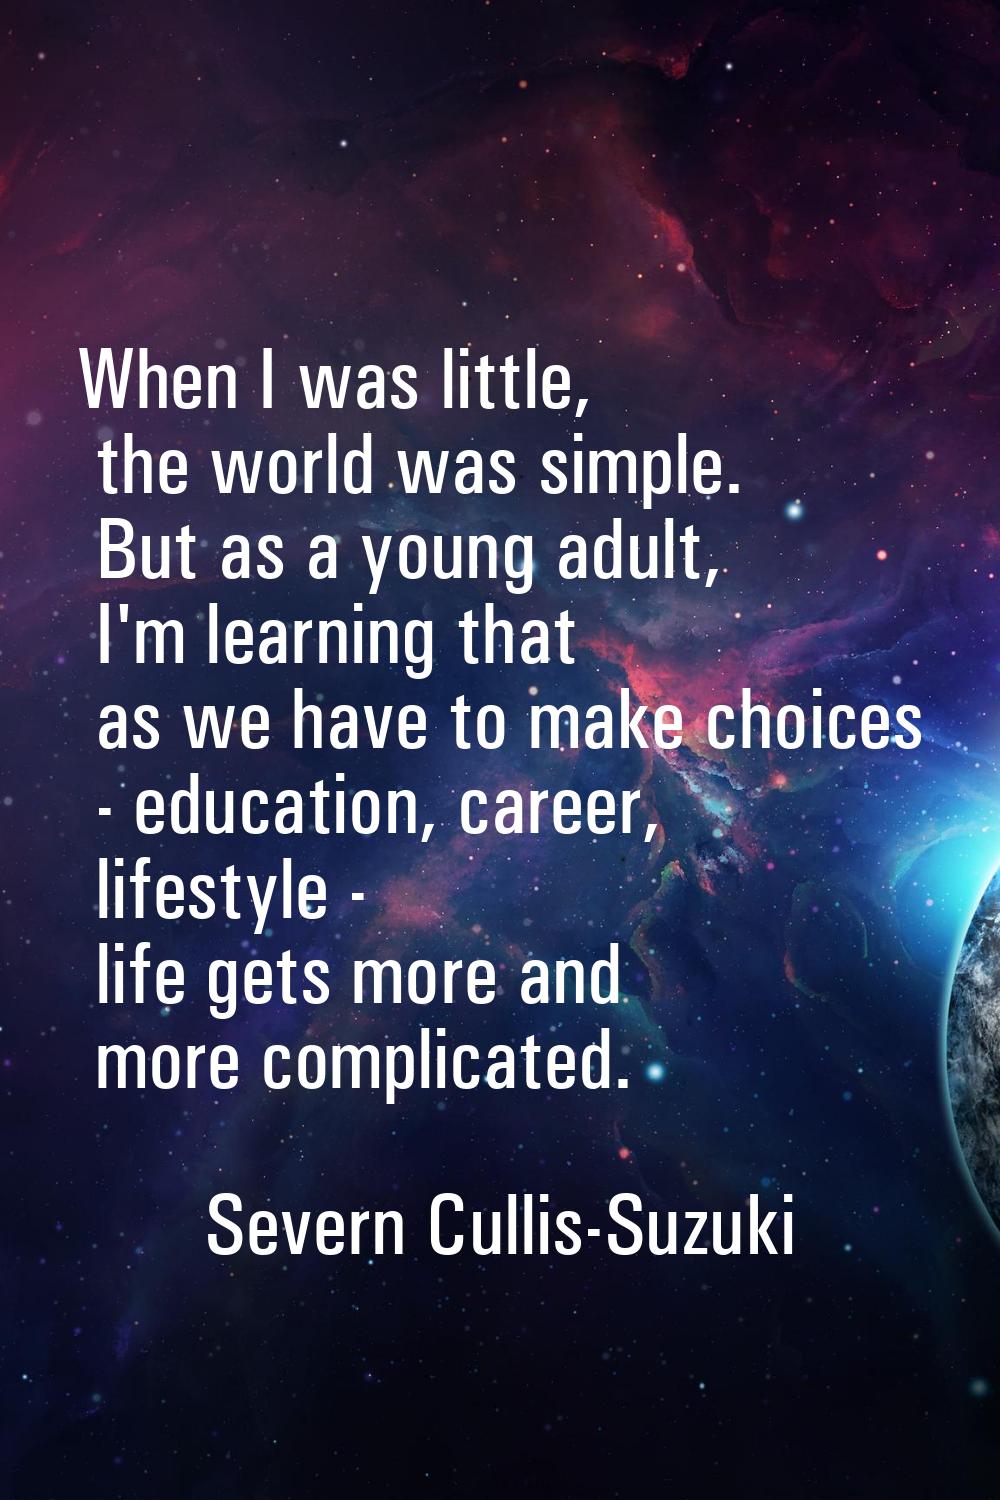 When I was little, the world was simple. But as a young adult, I'm learning that as we have to make